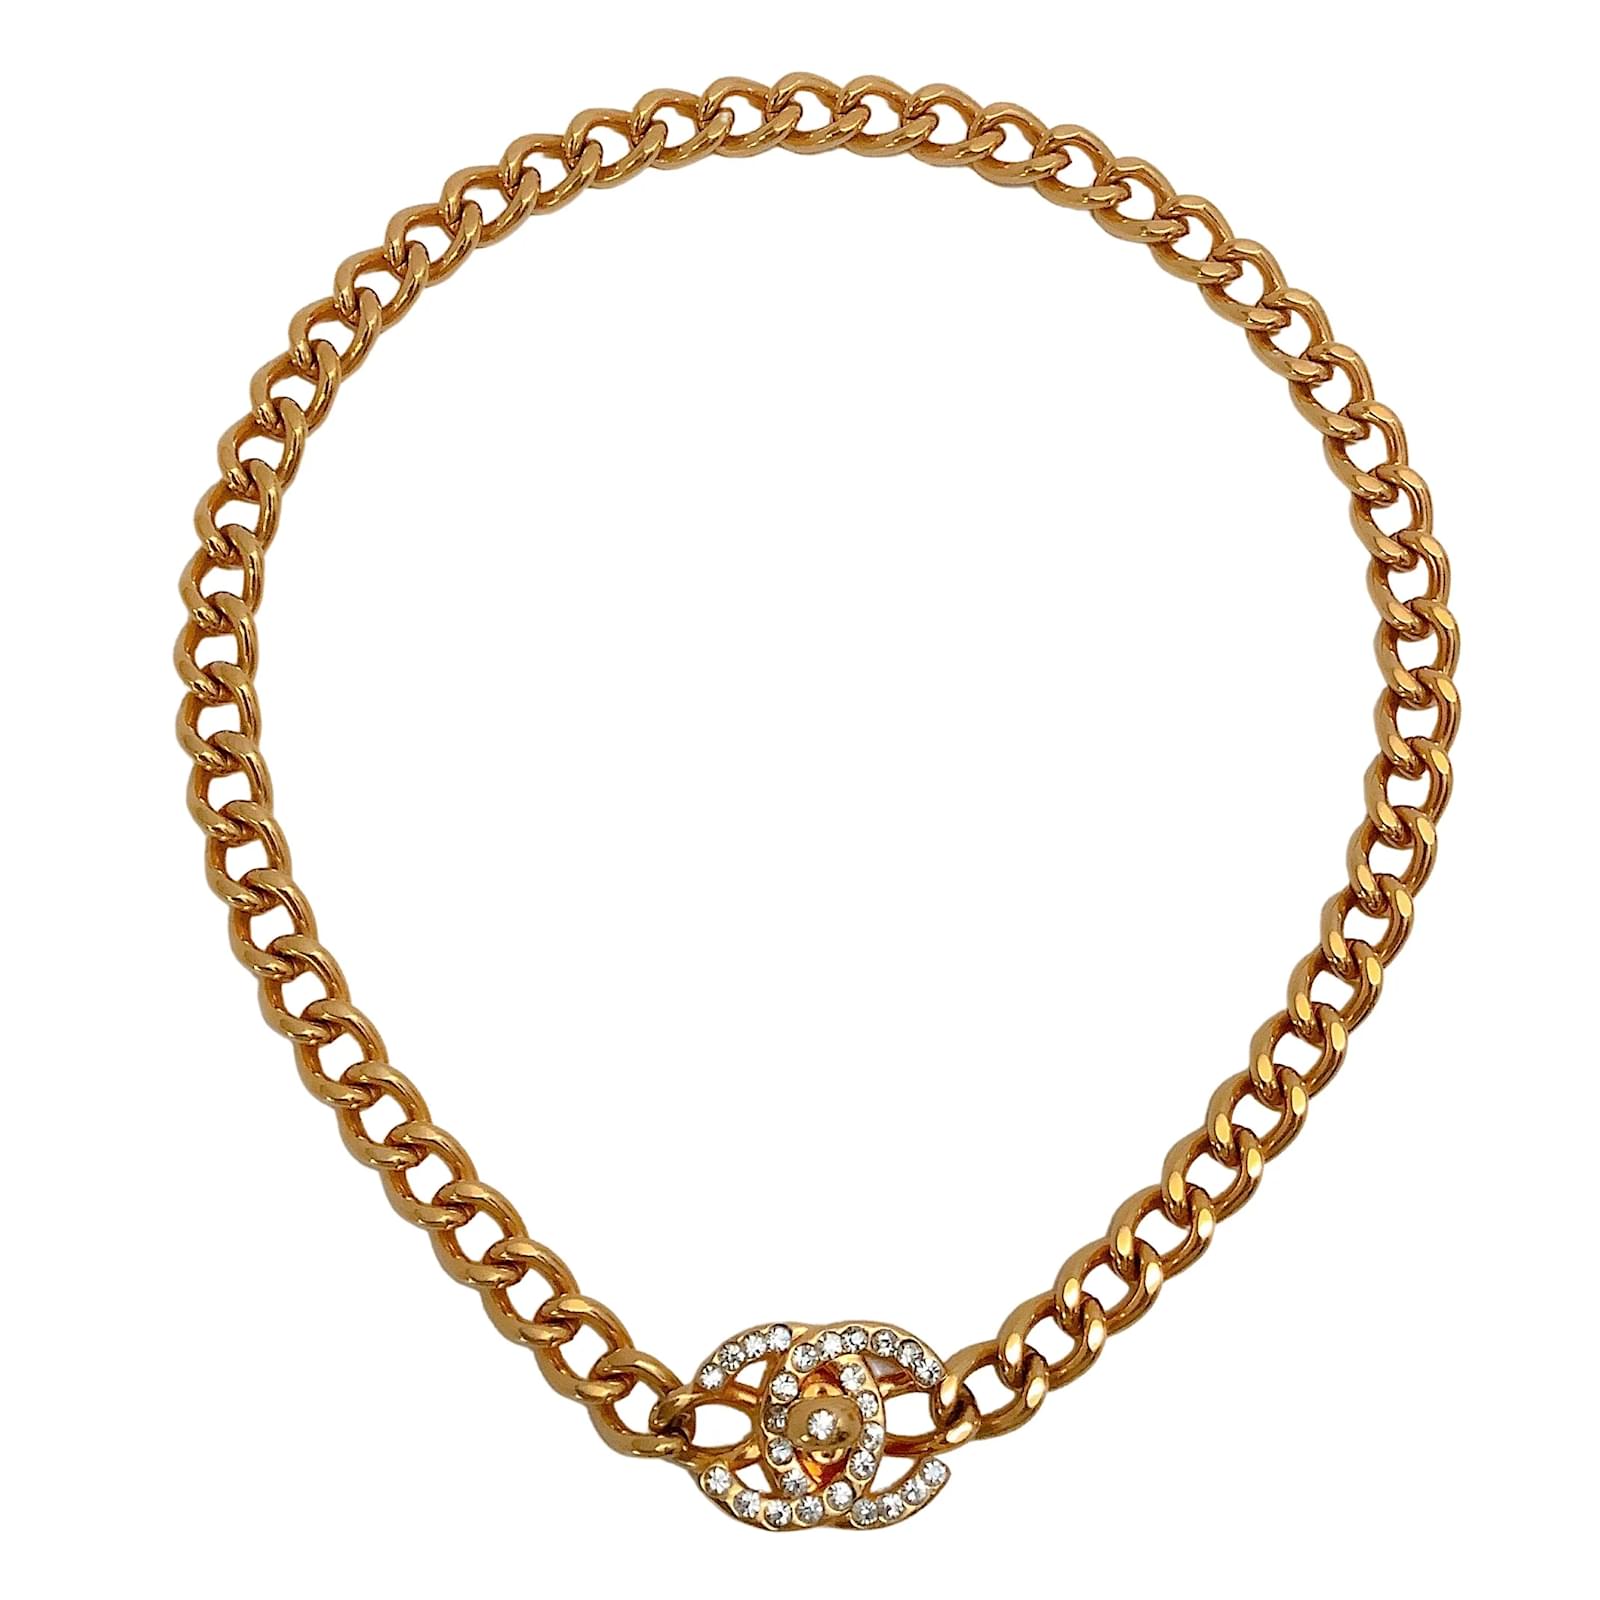 Cc necklace Chanel Gold in Gold plated - 41713173